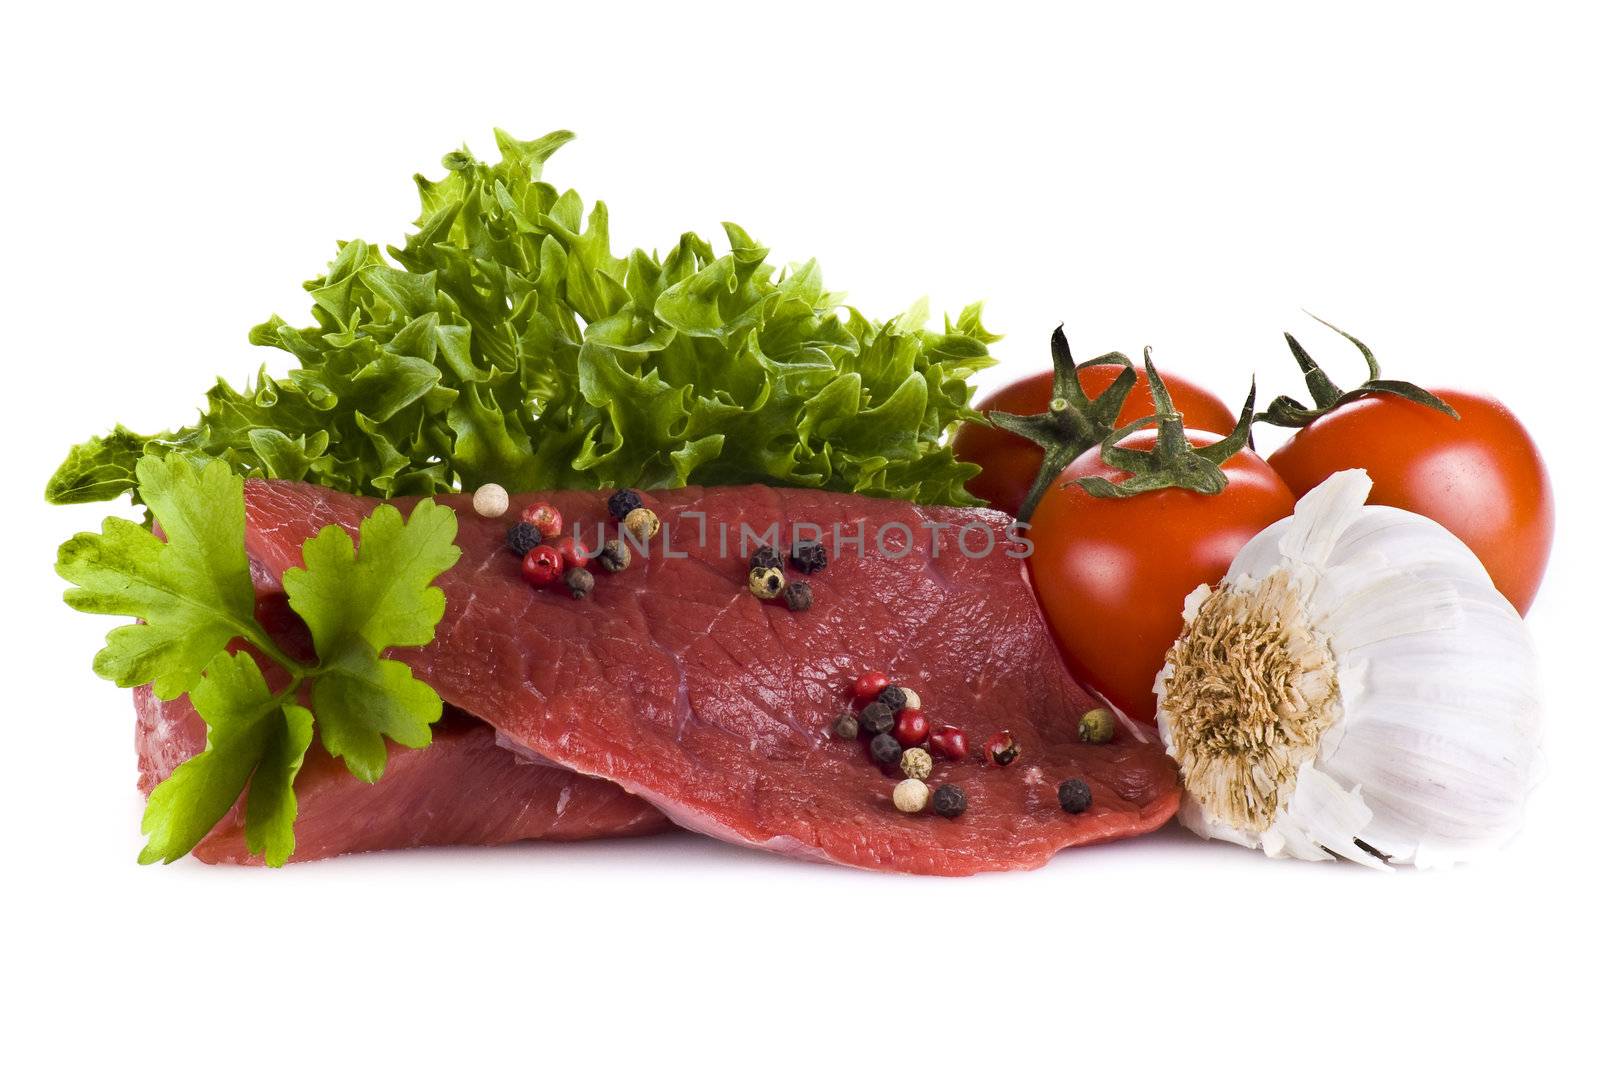 Raw beef frying steak with vegetables isolated over white background